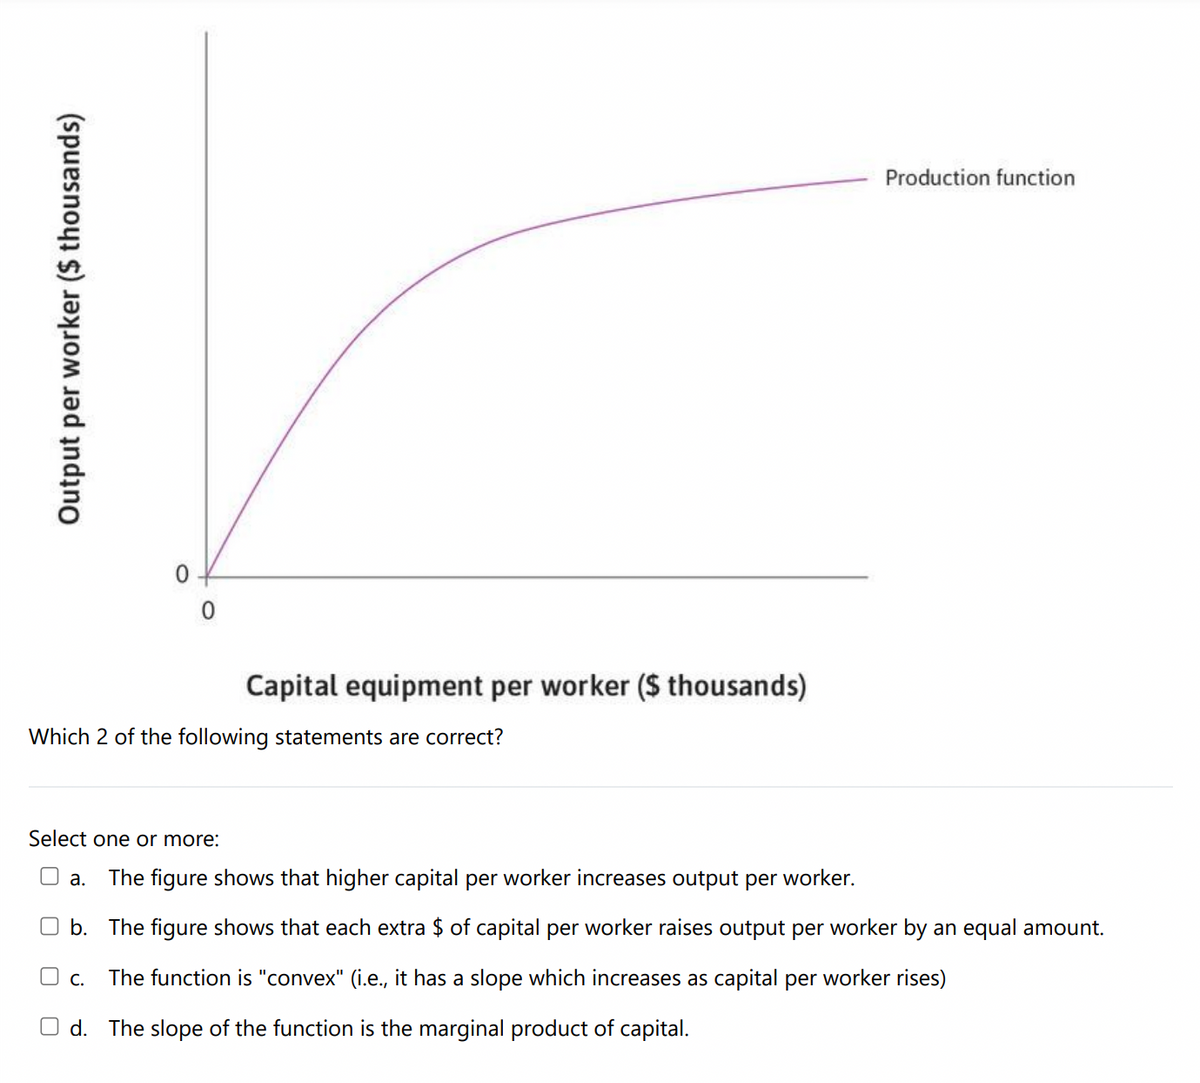 Production function
Capital equipment per worker ($ thousands)
Which 2 of the following statements are correct?
Select one or more:
Ja.
The figure shows that higher capital per worker increases output per worker.
b. The figure shows that each extra $ of capital per worker raises output per worker by an equal amount.
O c.
The function is "convex" (i.e., it has a slope which increases as capital per worker rises)
d. The slope of the function is the marginal product of capital.
Output per worker ($ thousands)
